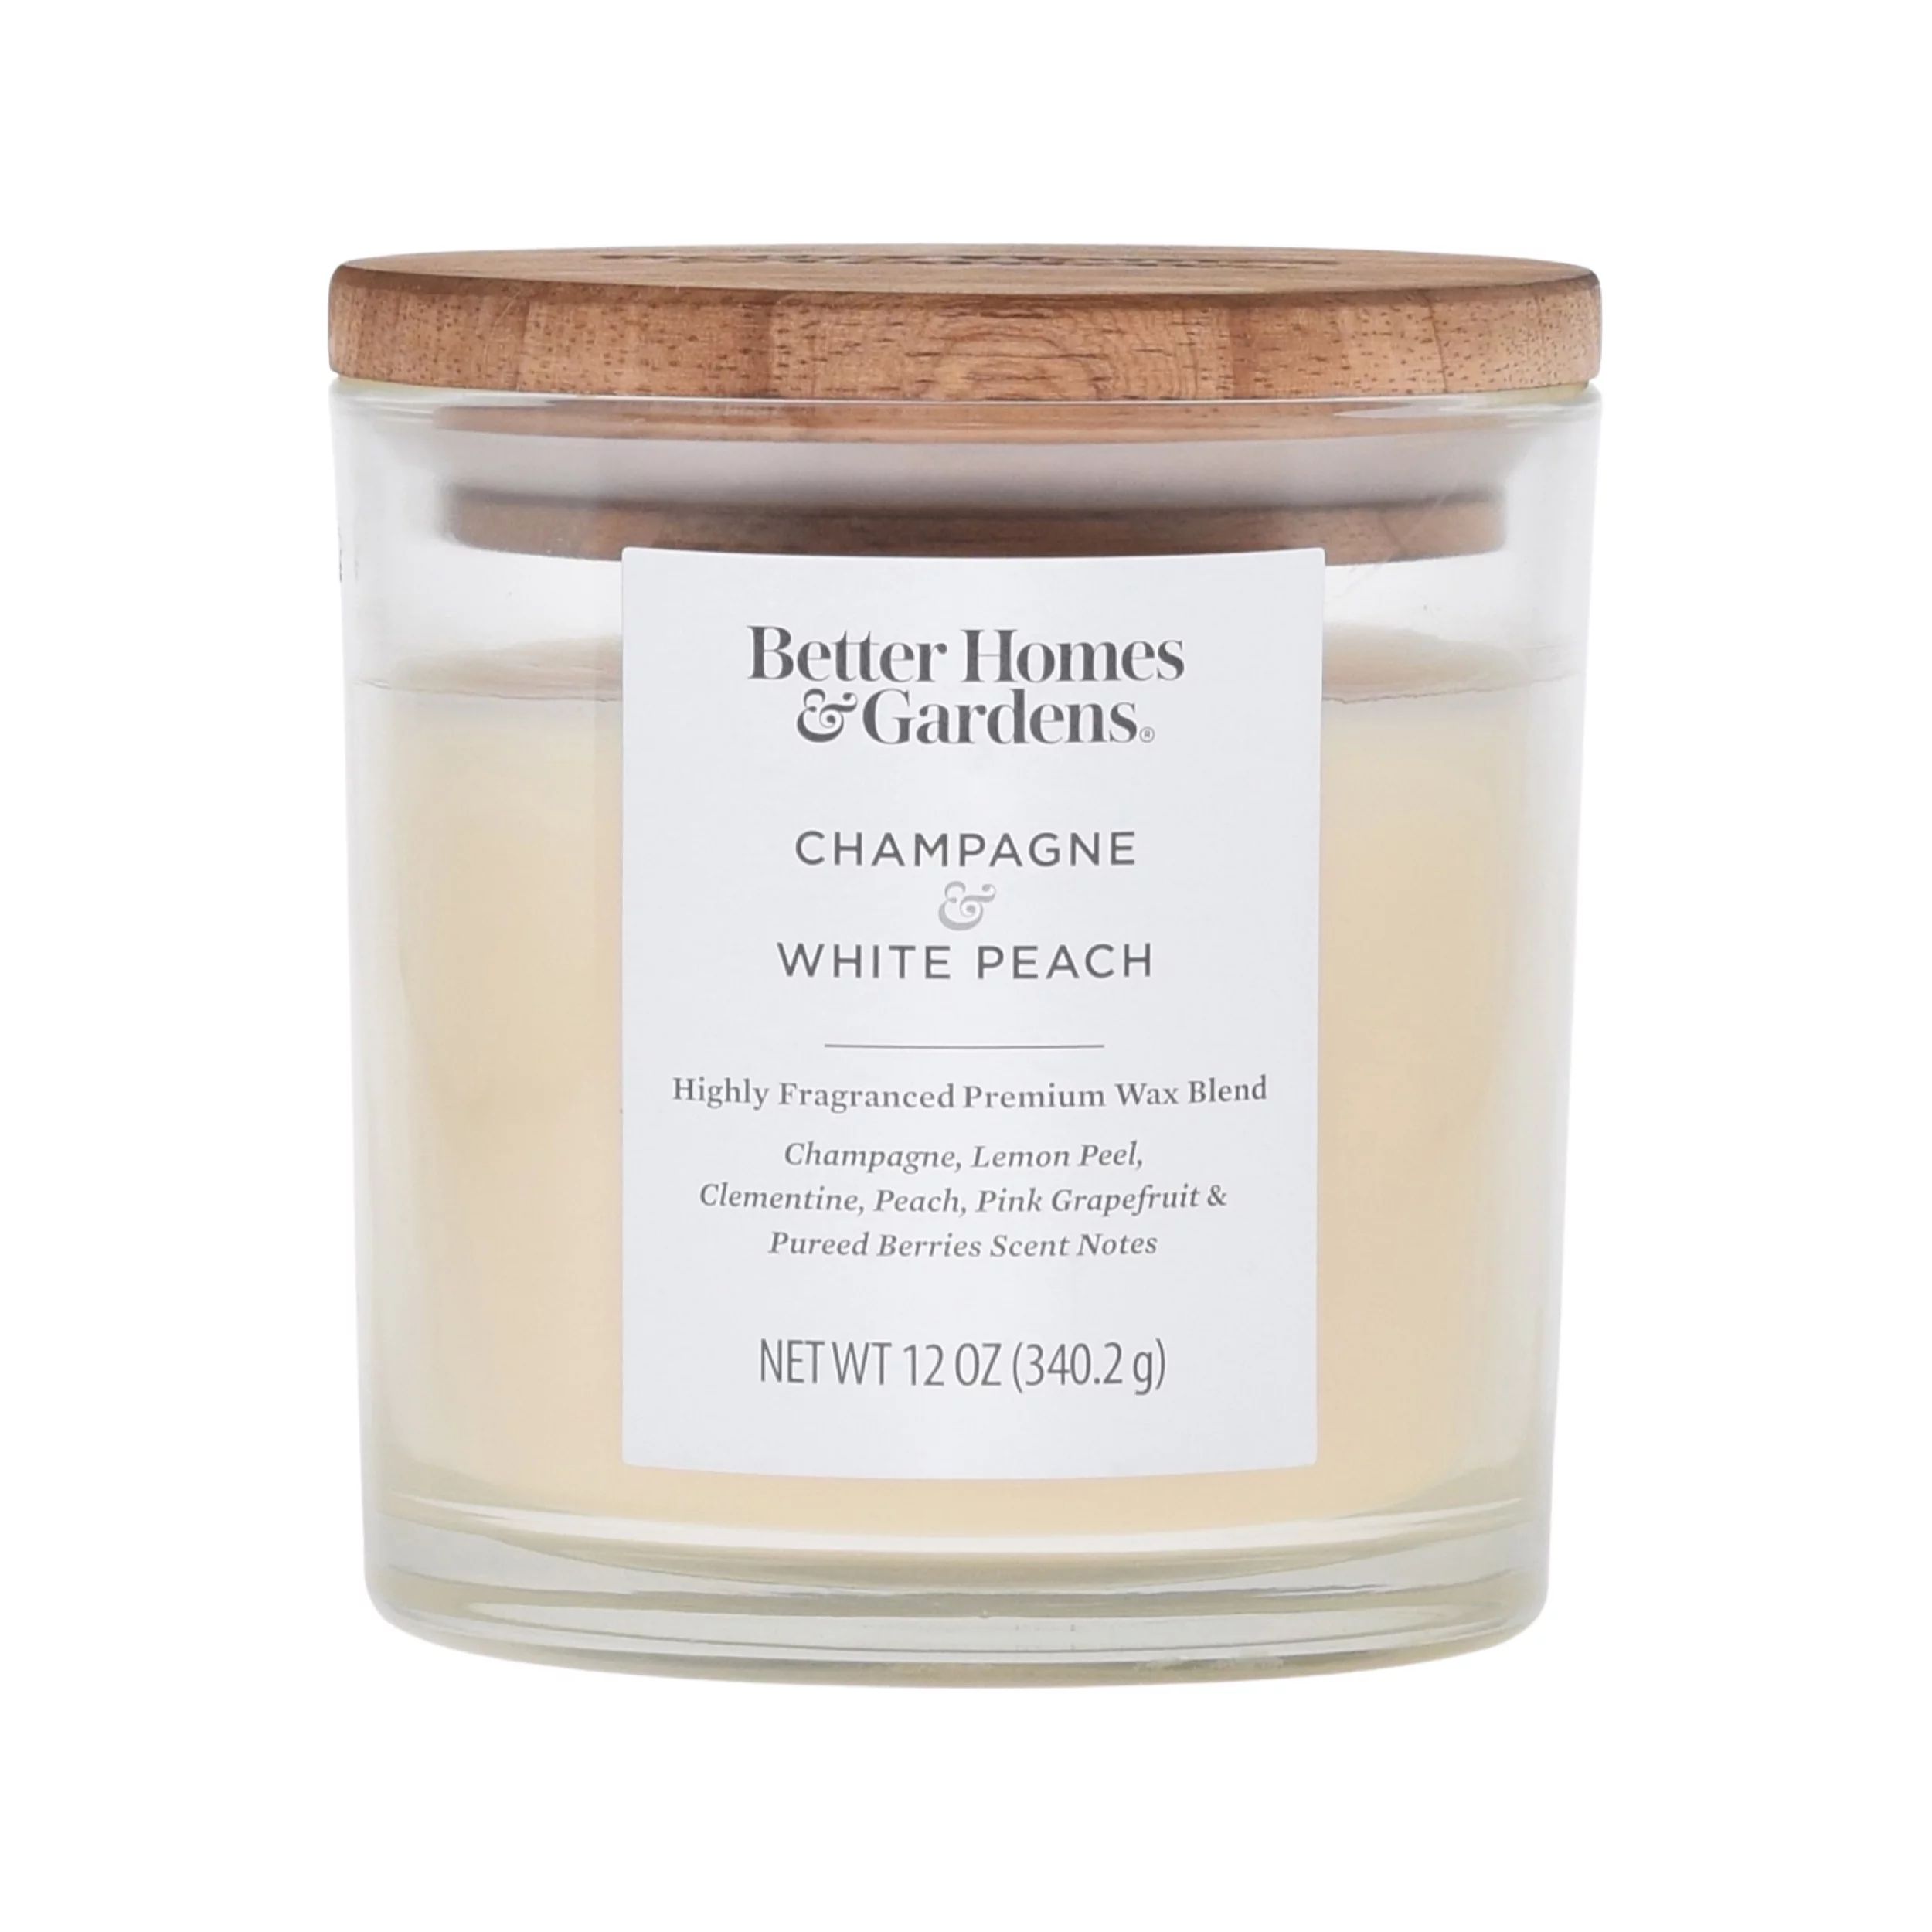 Better Homes & Gardens 12oz Champagne & White Peach Scented 2-Wick Ombre Jar Candle | Walmart (US)